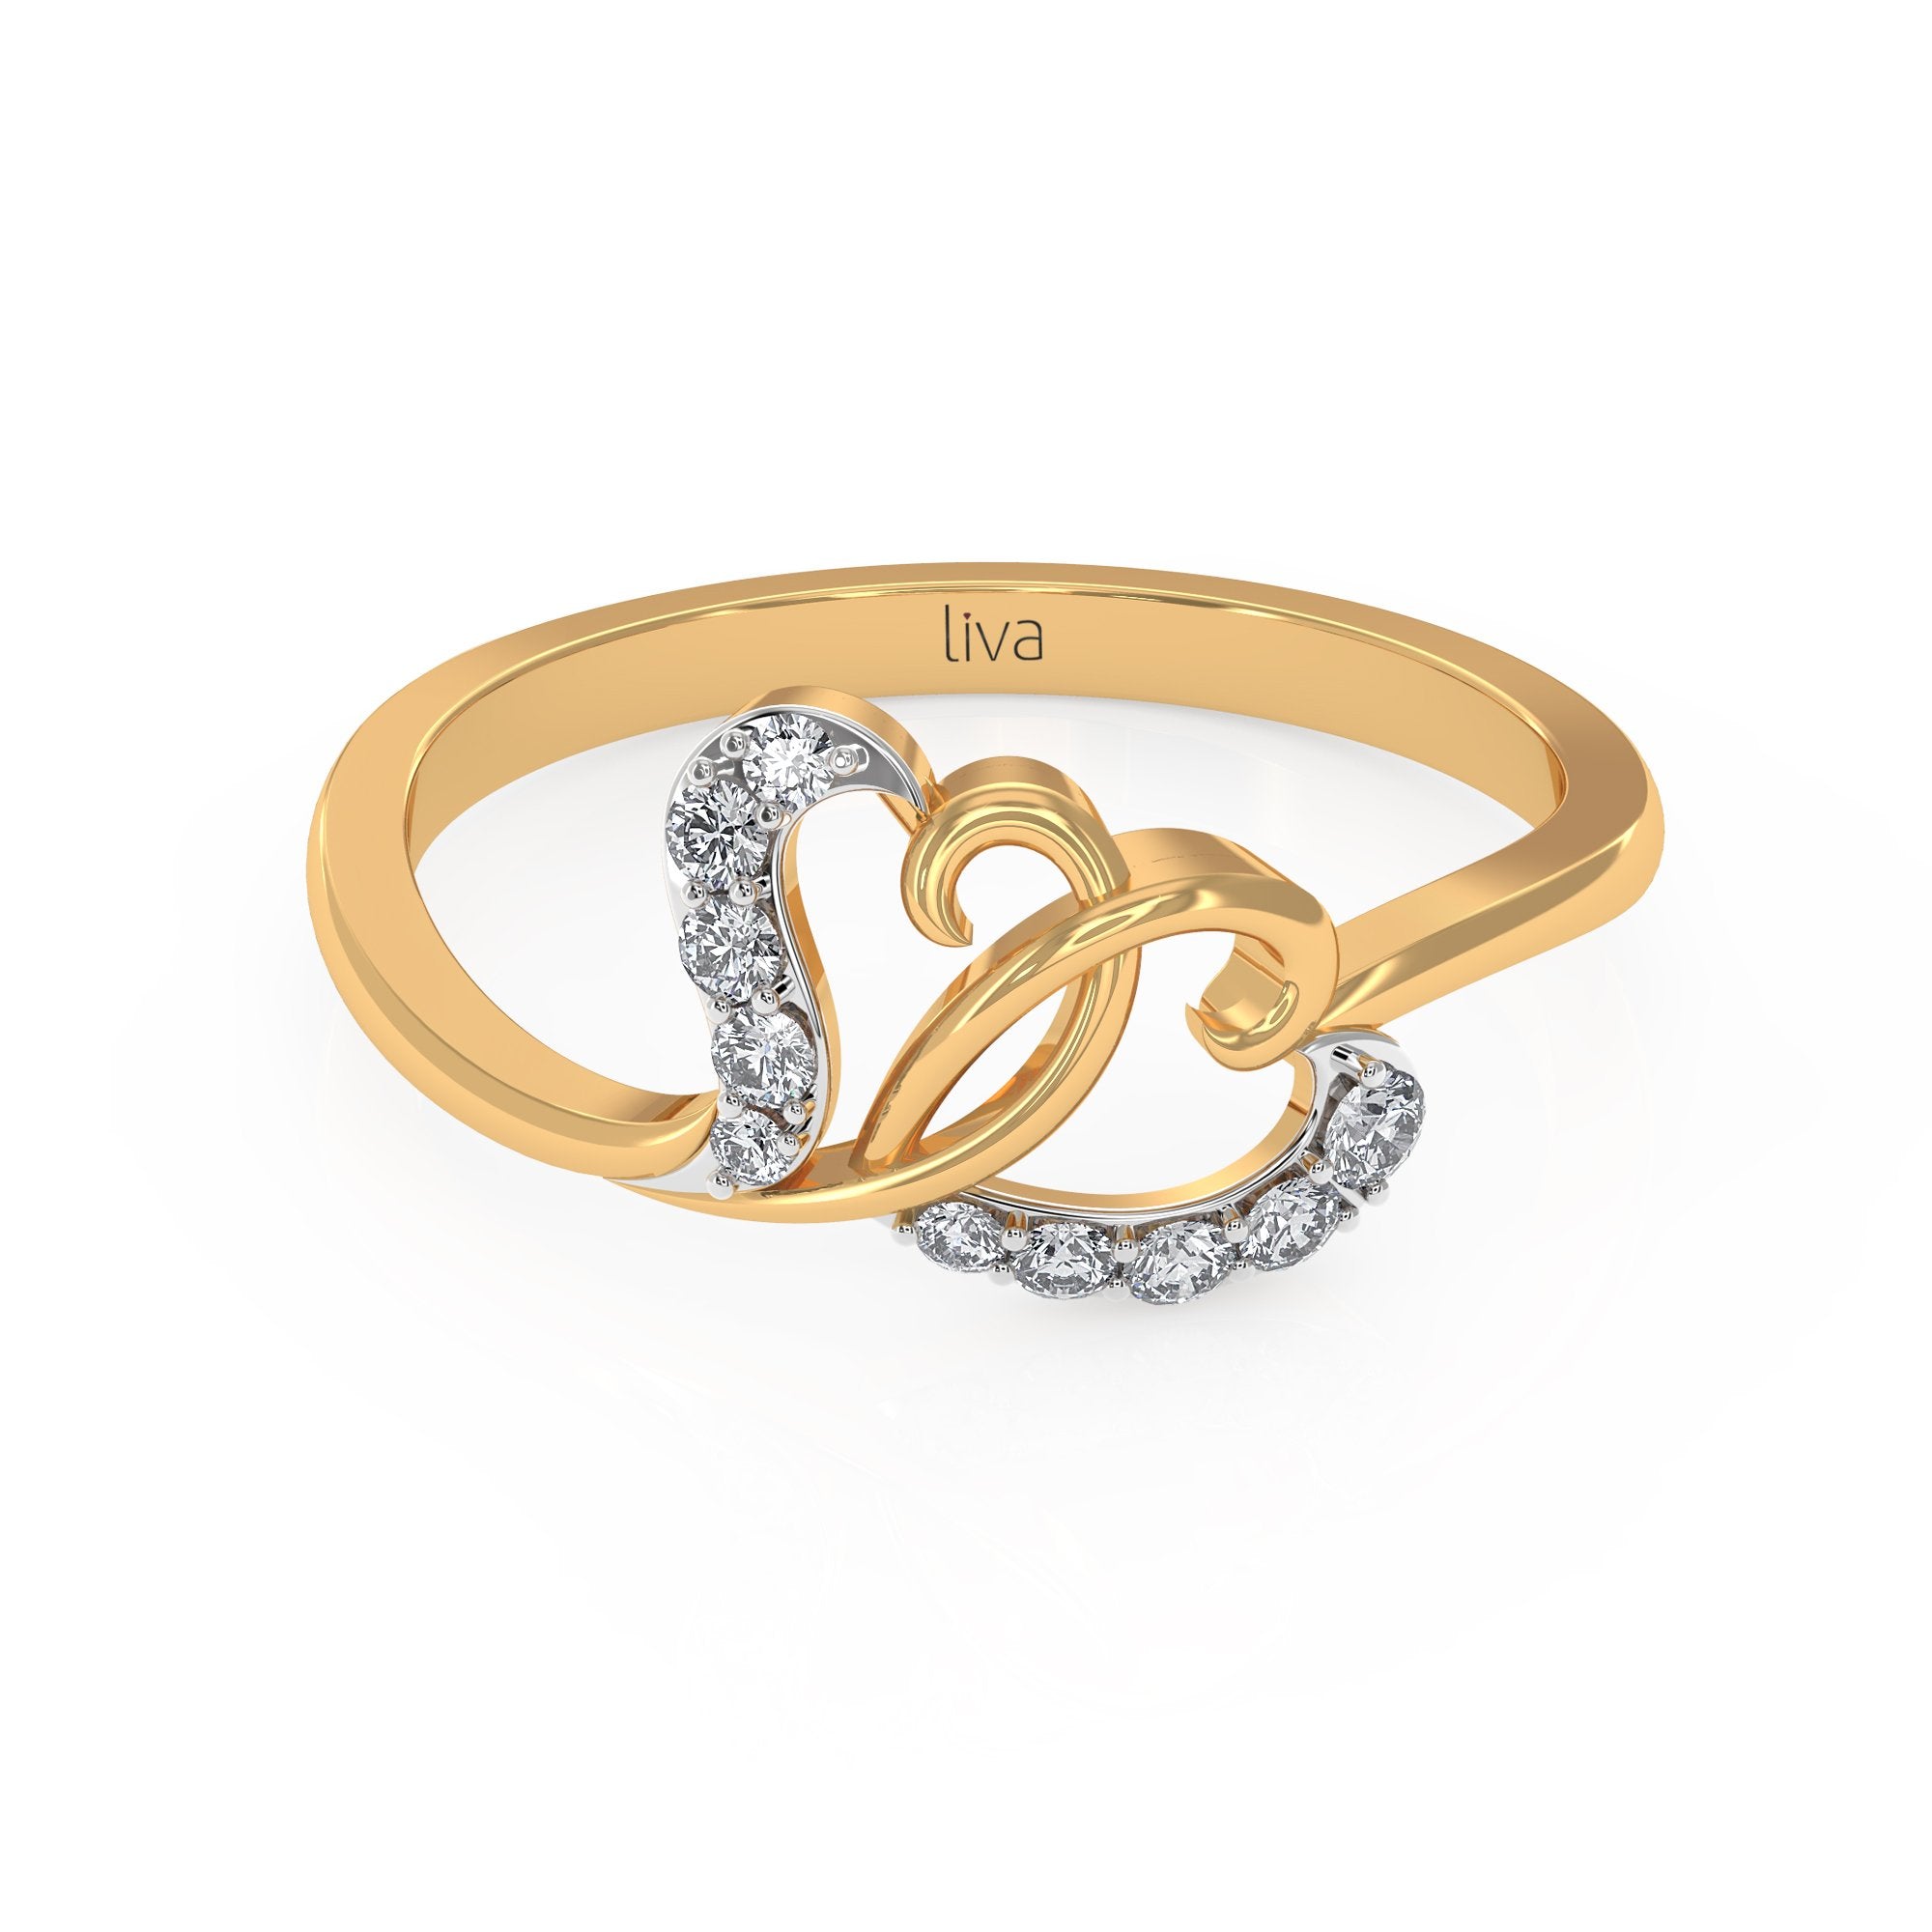 Entwined Hearts Ring_LDR1019